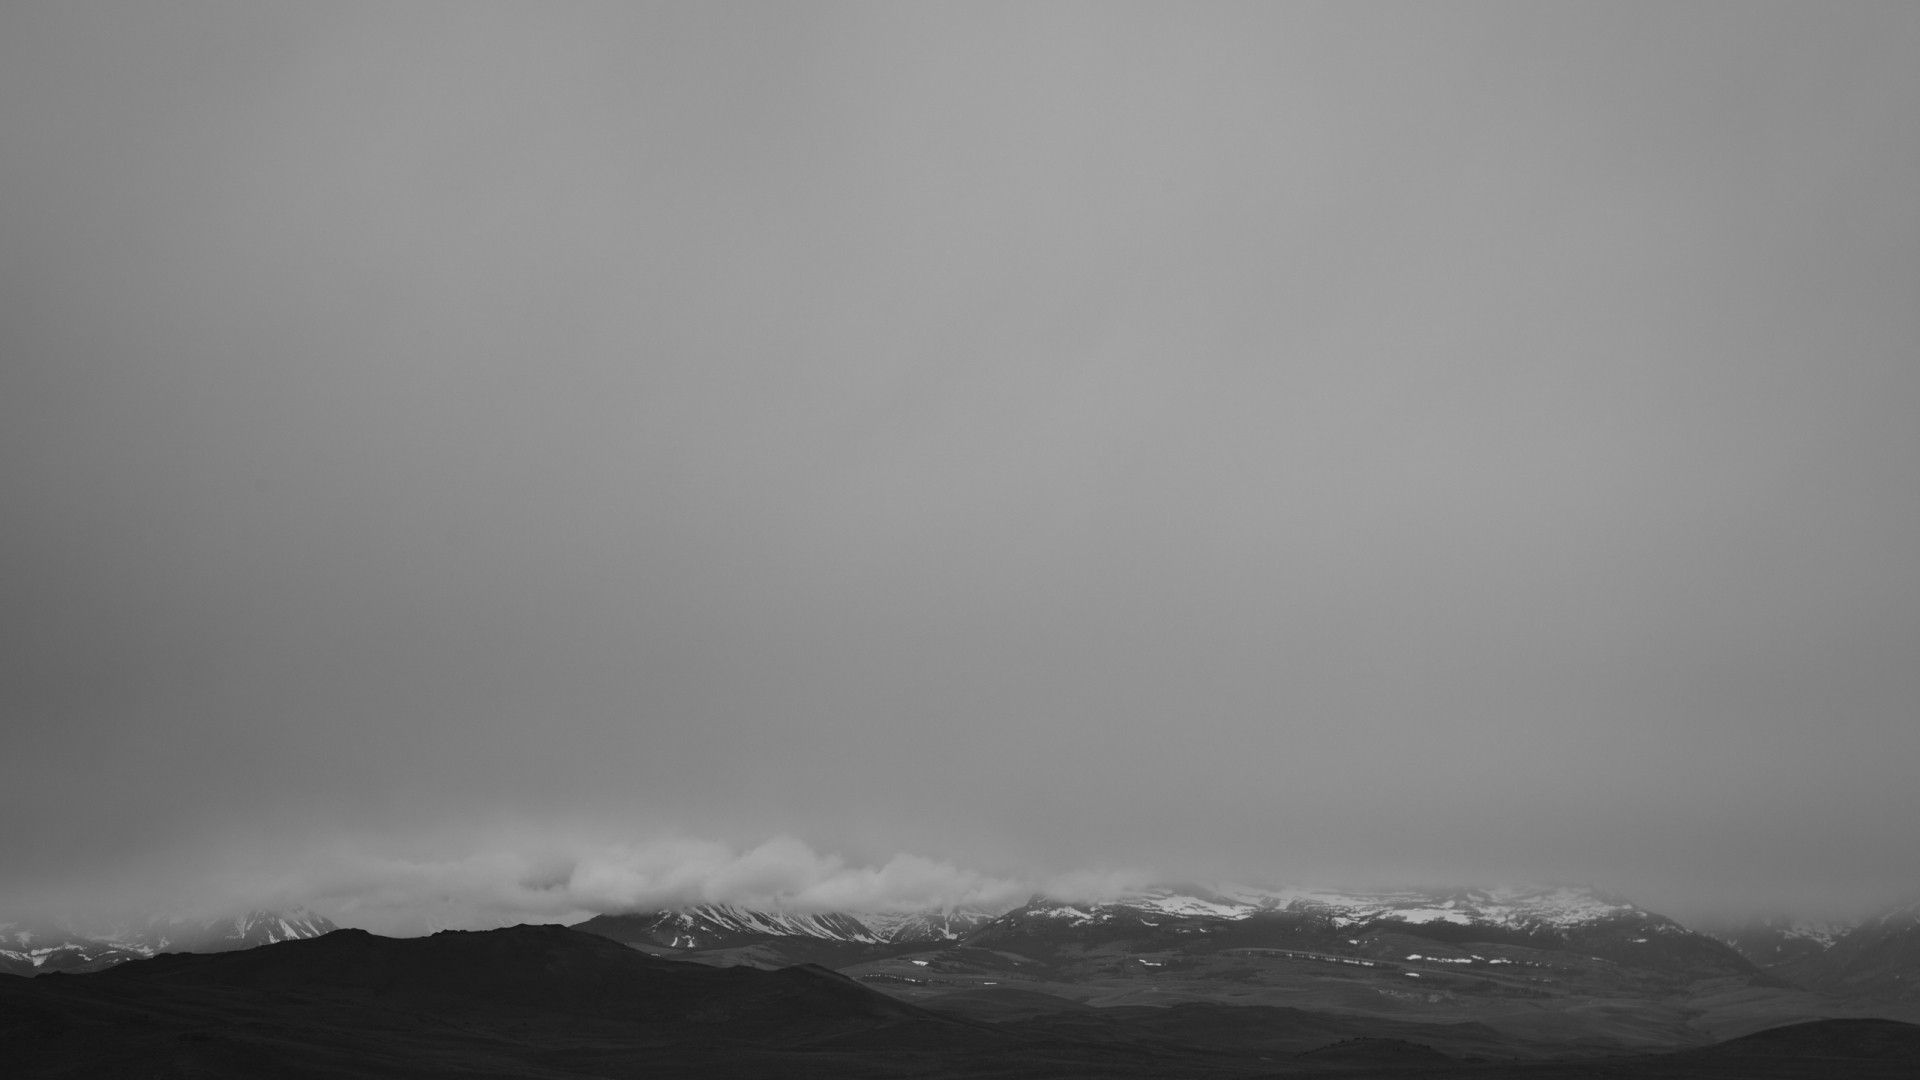 A black and white photo of snowy mountains - Black